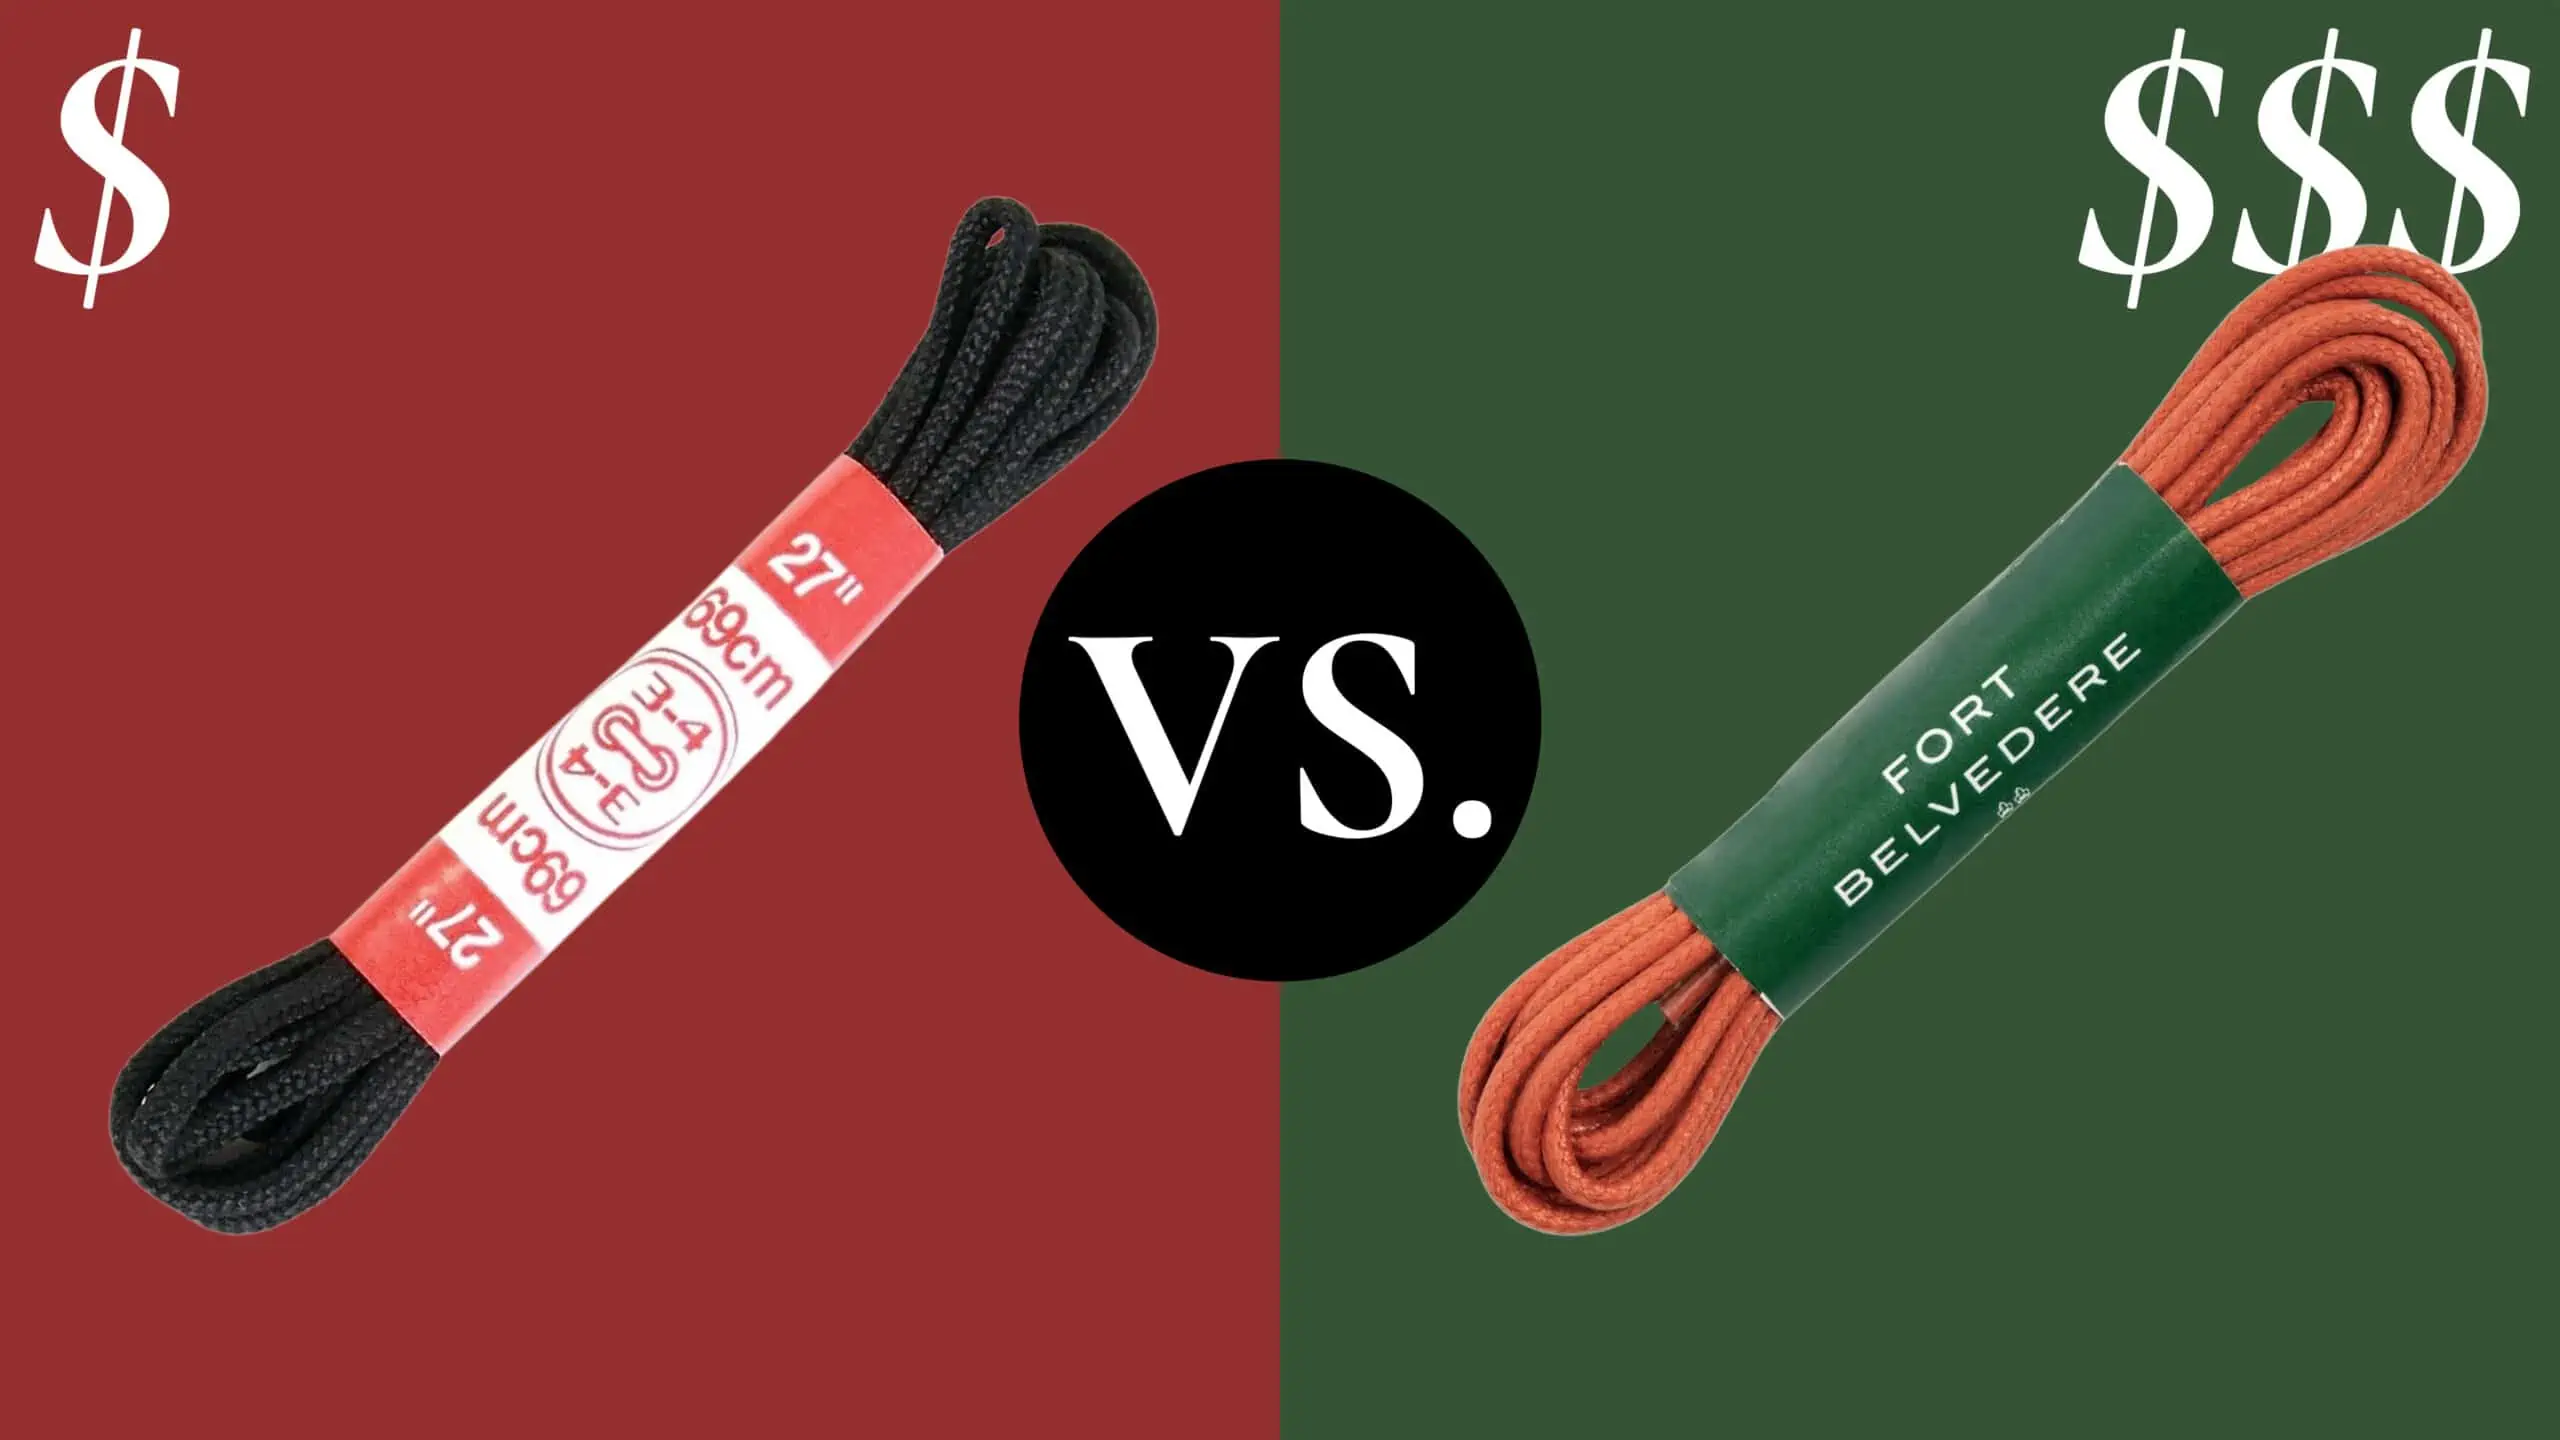 Cheap vs Expensive Shoelaces 3840x2160 v1 scaled